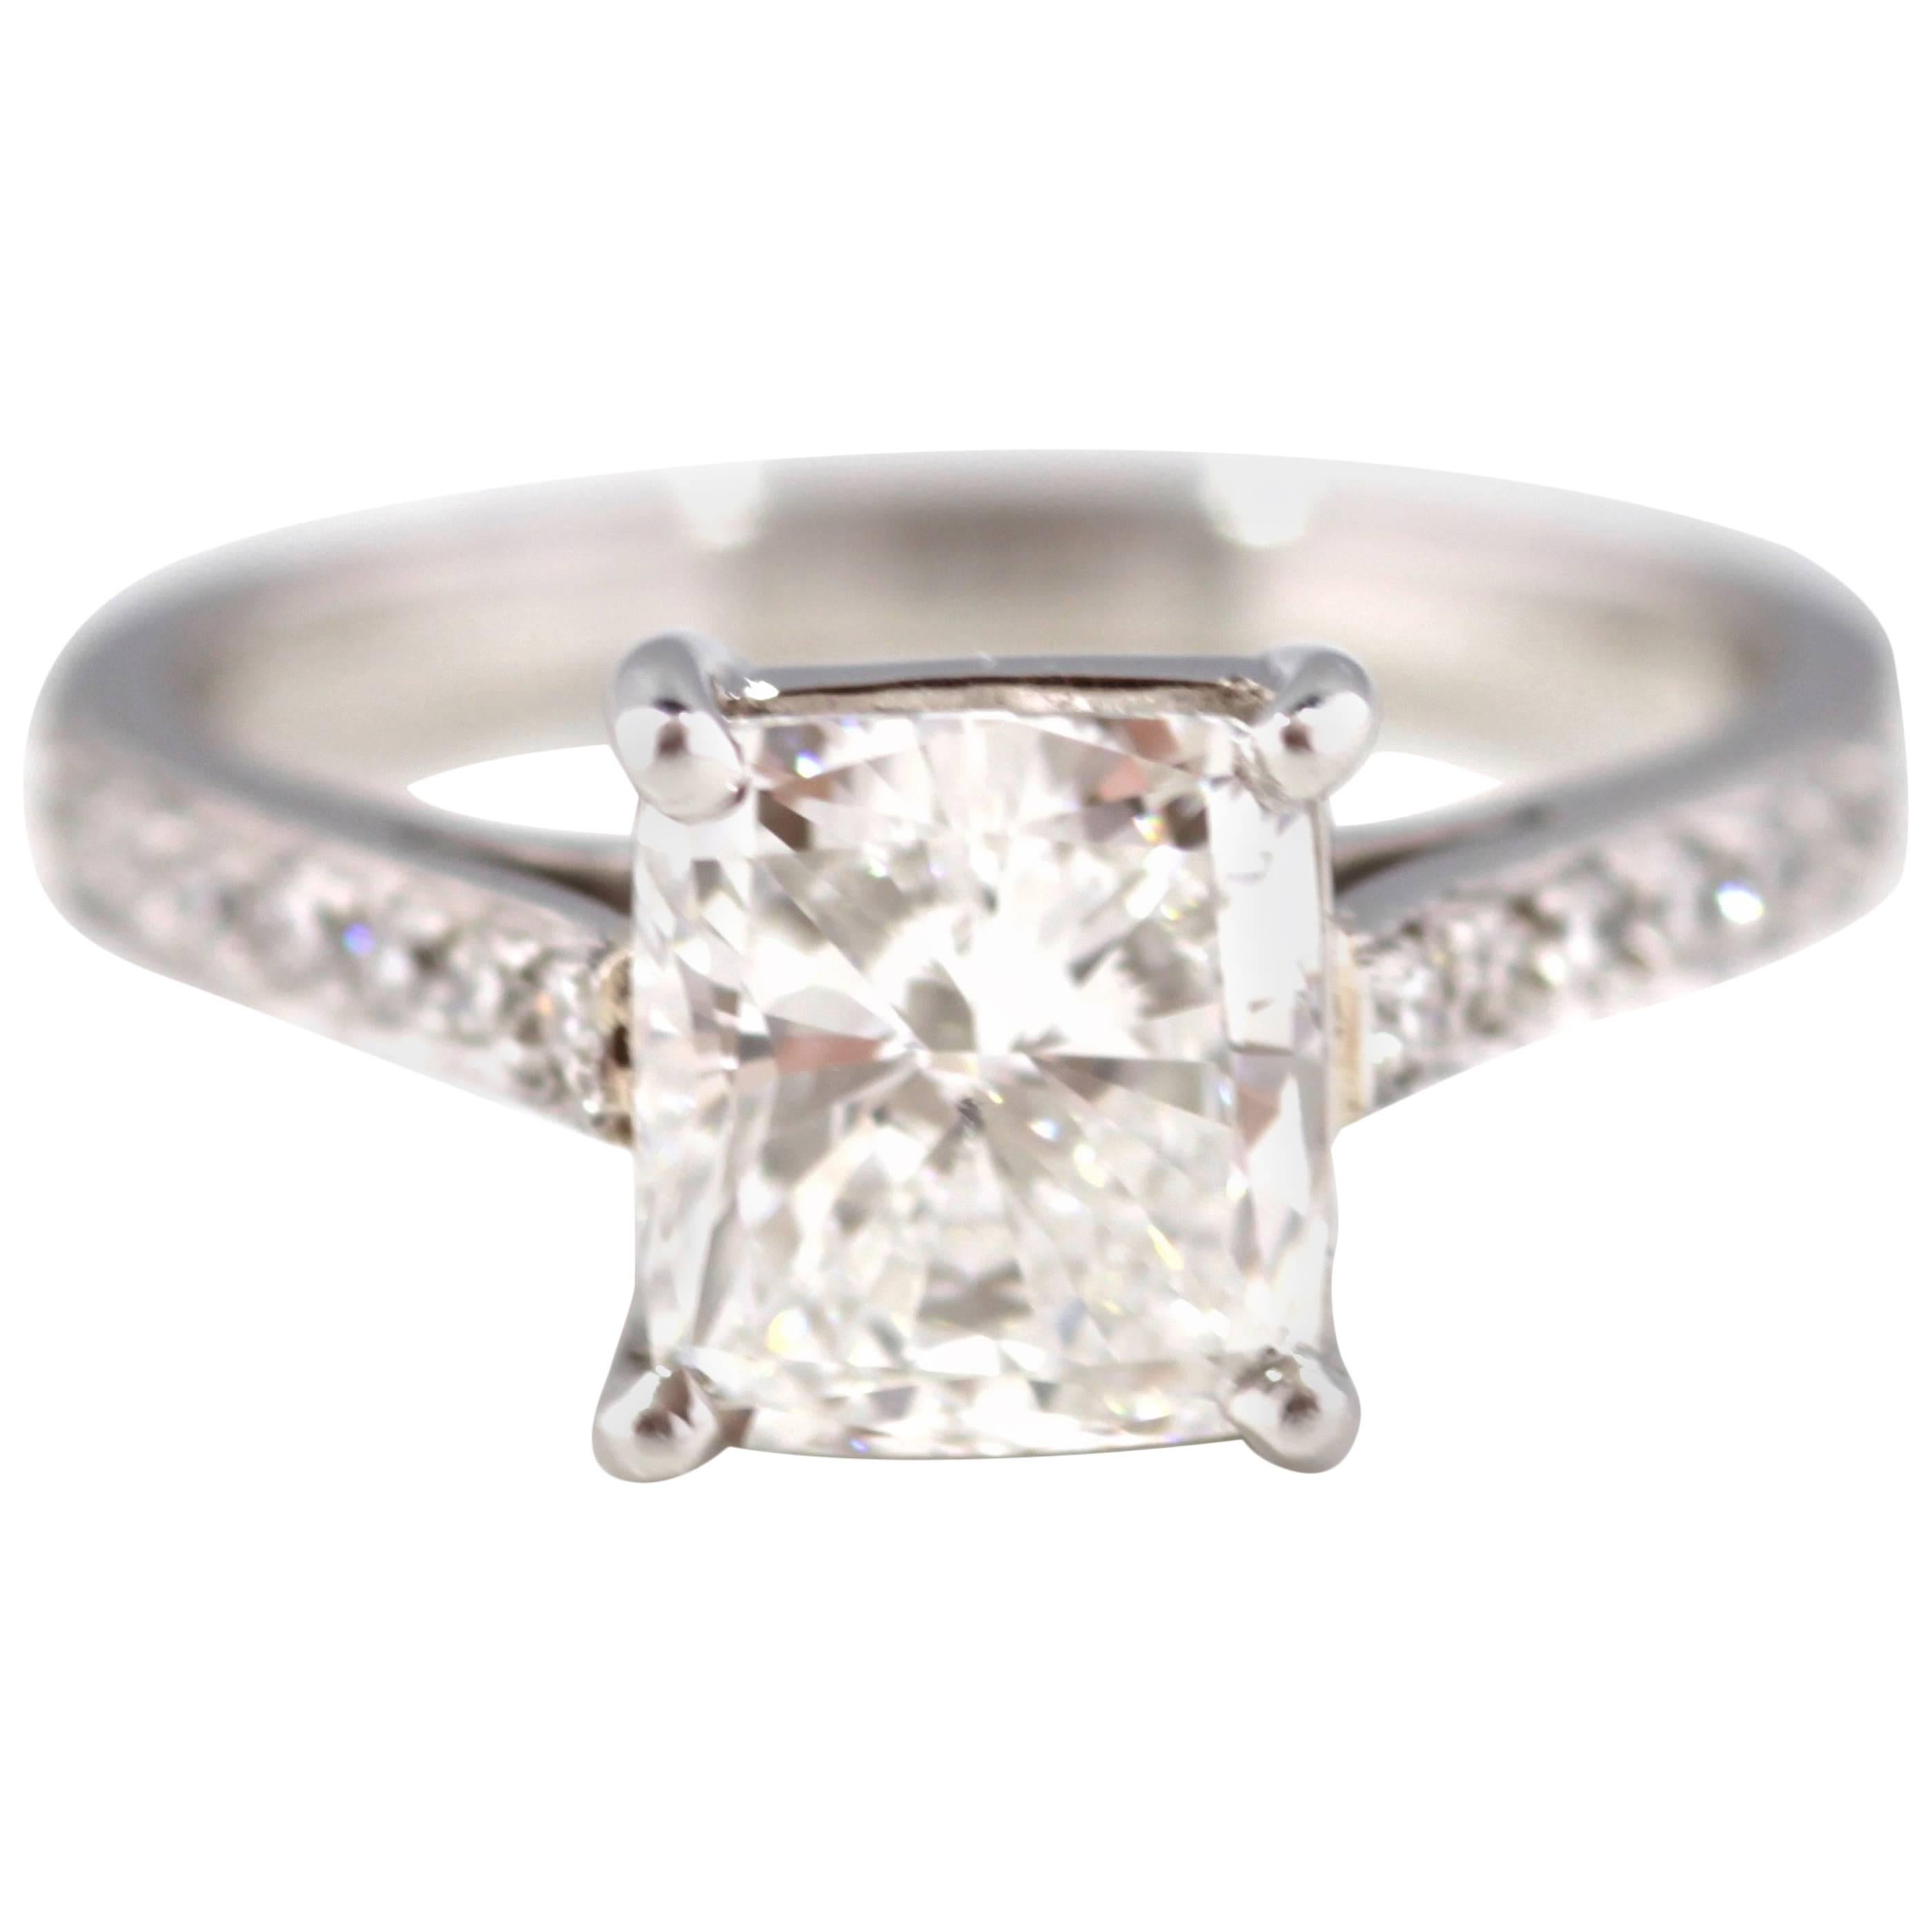 2.01 Carat GIA Certified Cushion Modified Brilliant Cut Diamond Ring For Sale